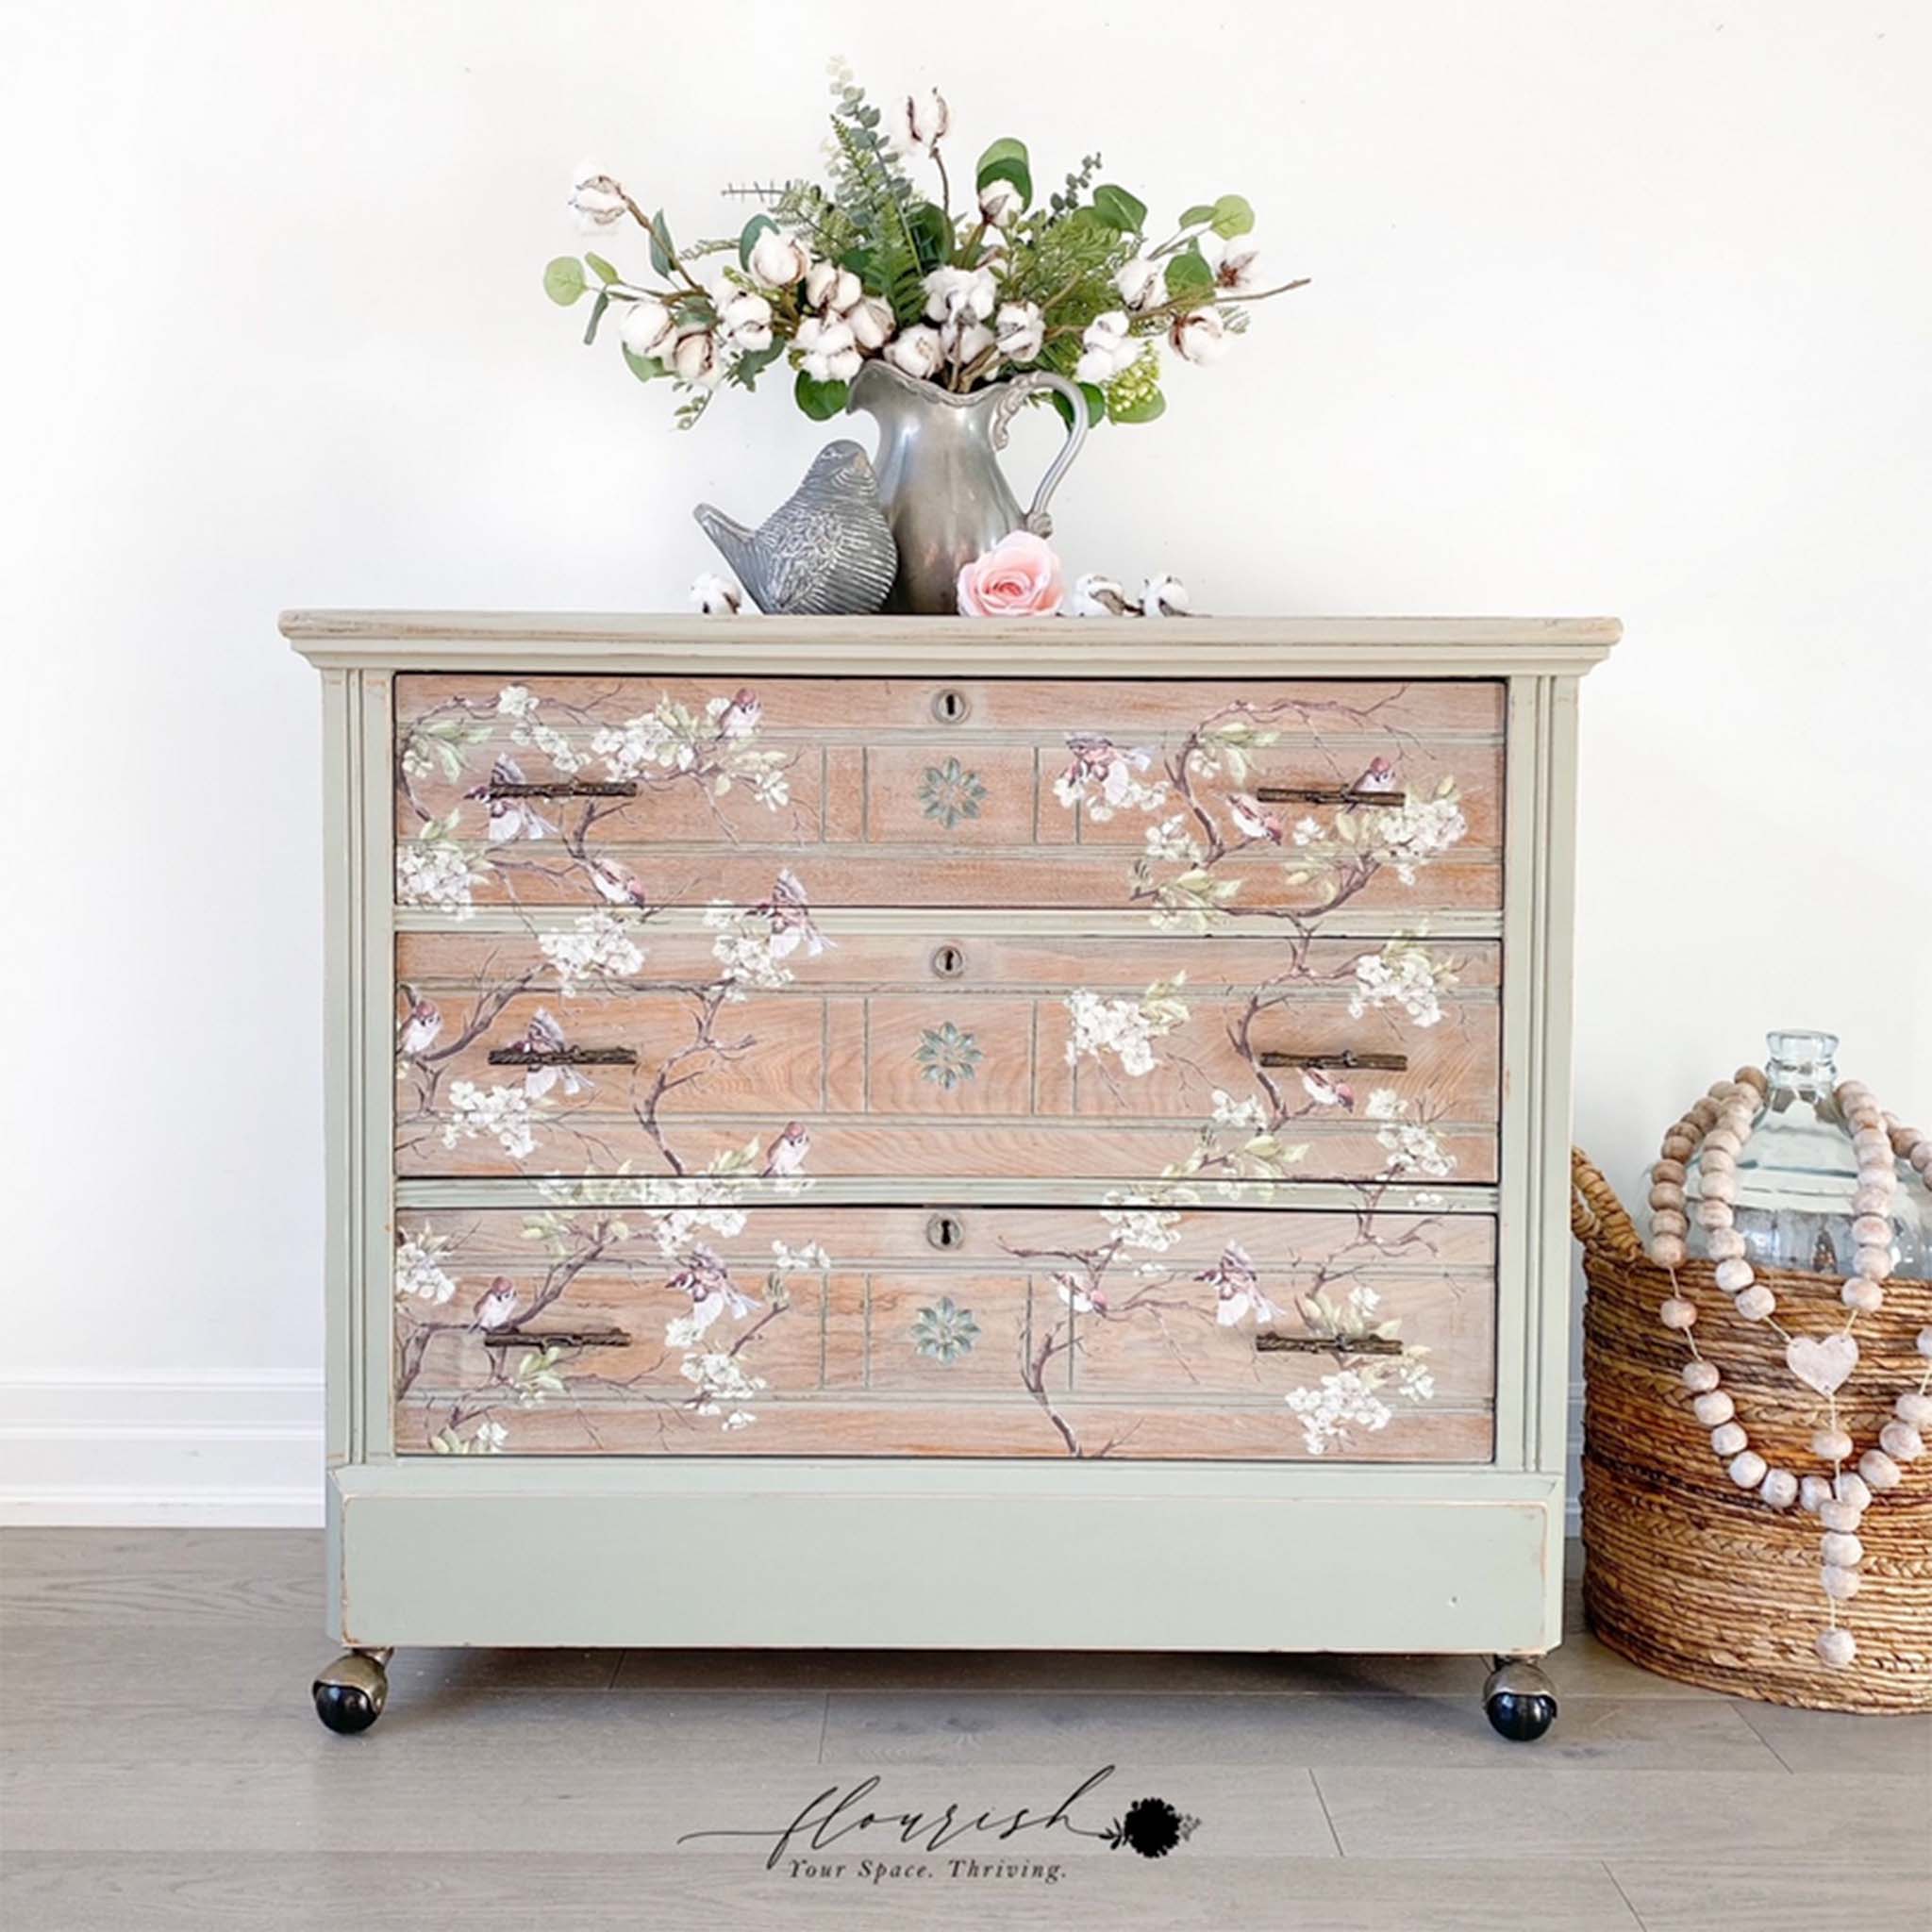 Tan dresser with the Blossom Flight transfer on top. A black Flourish your space thriving logo on the bottom right.